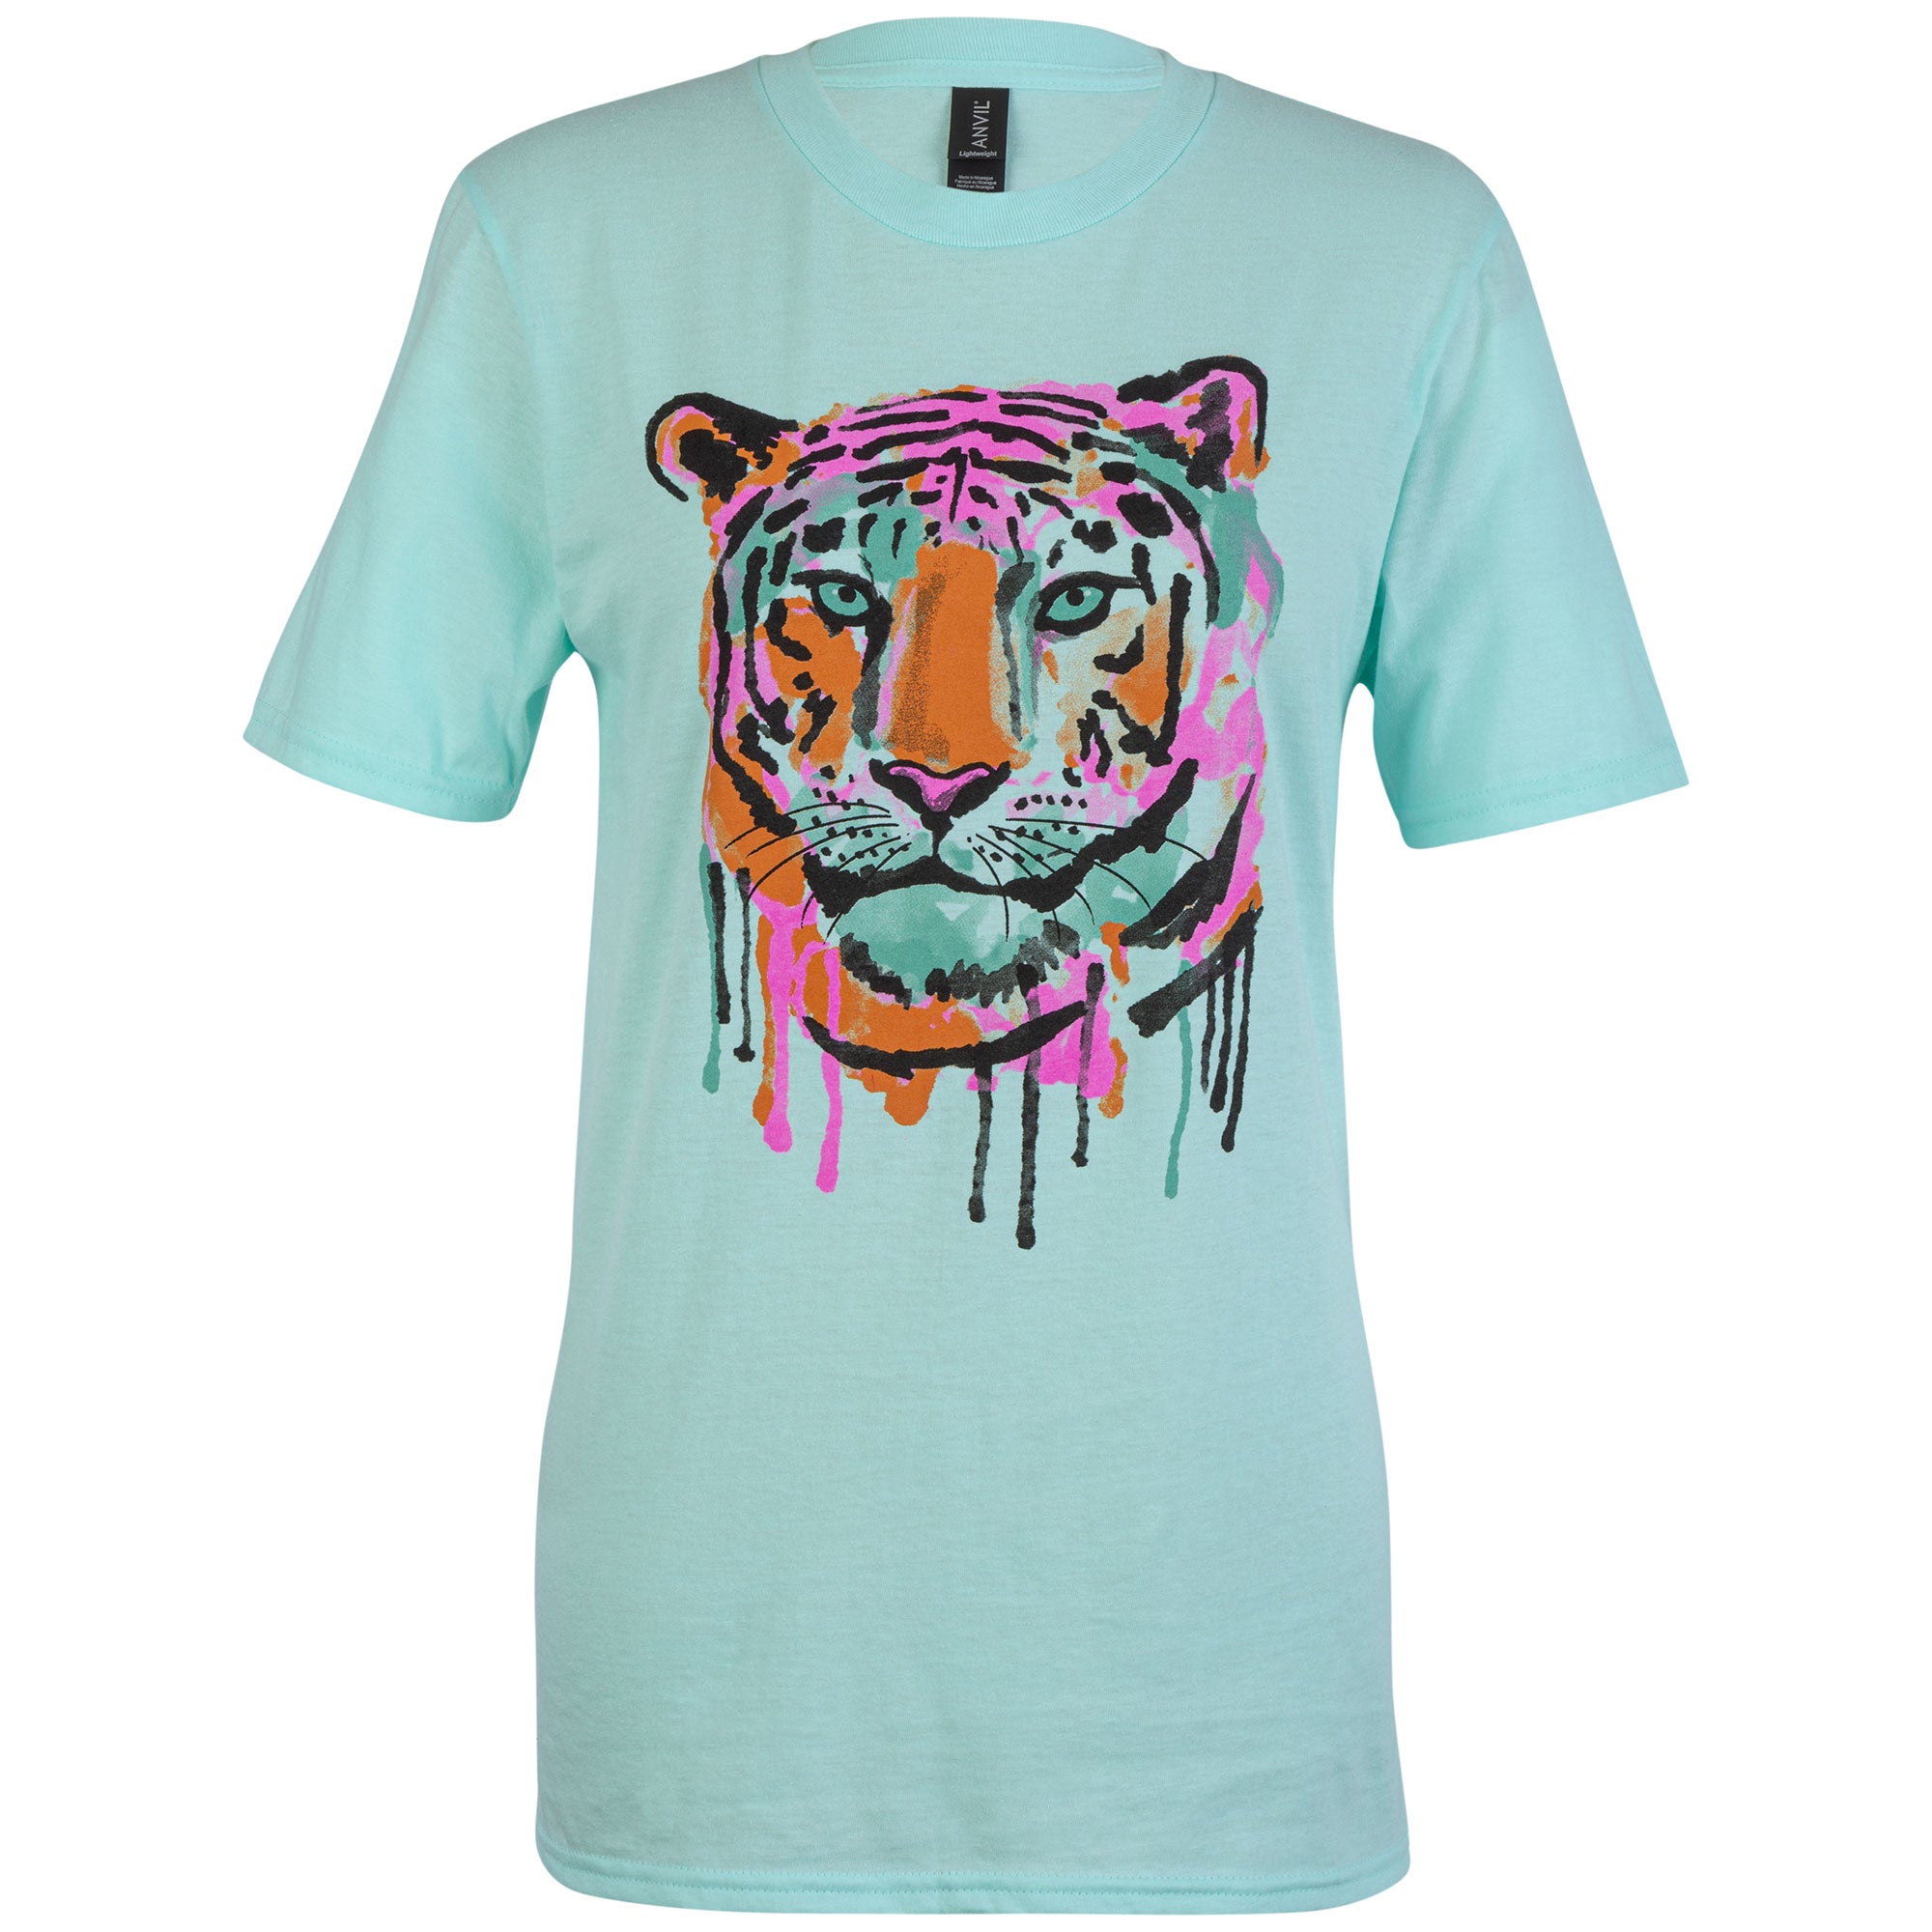 Painted Tiger T-Shirt - S